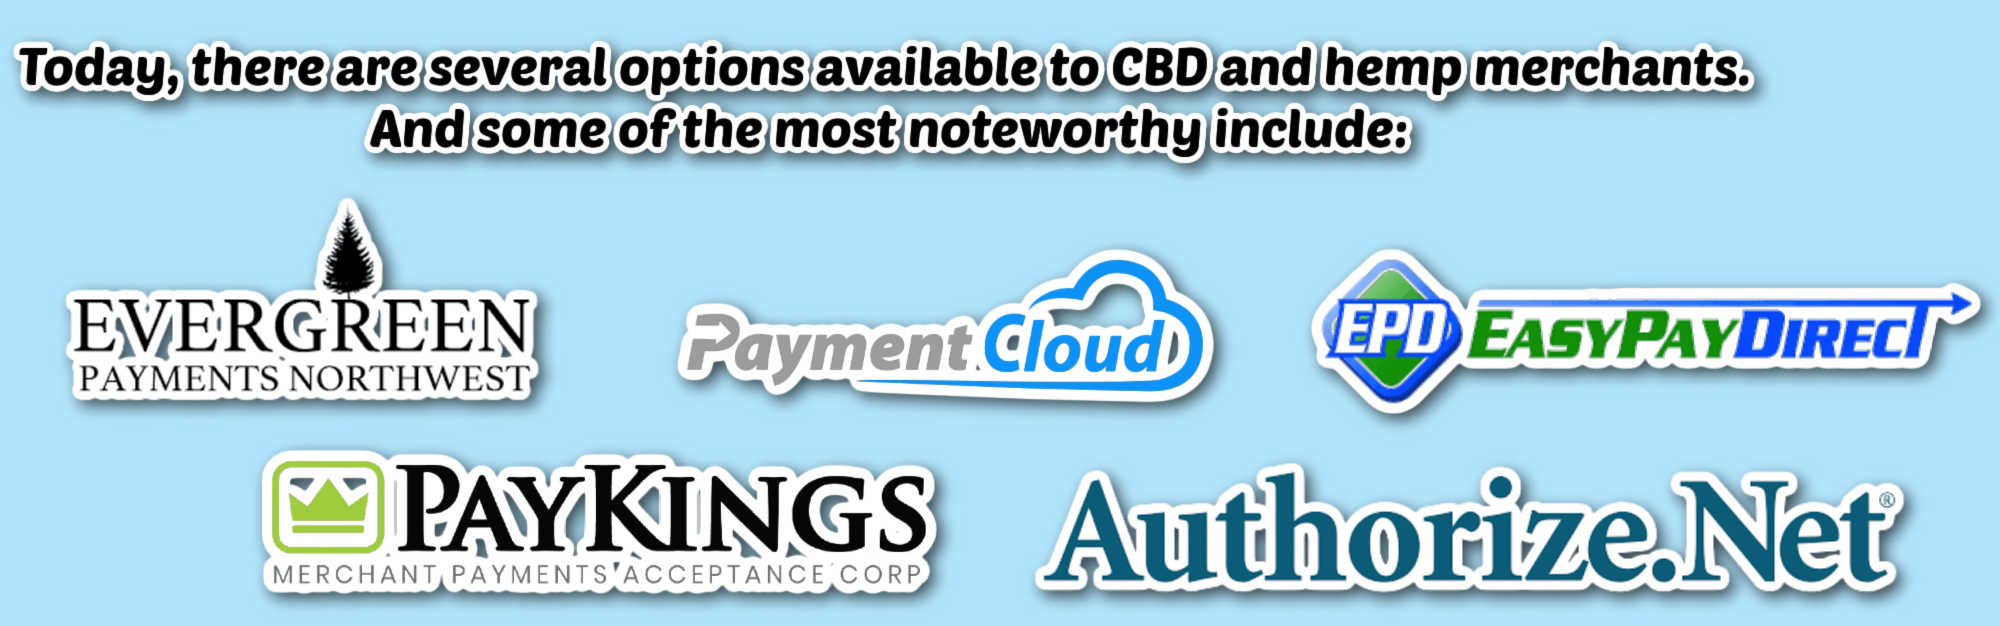 image of payment processors for cbd and hemp merchants